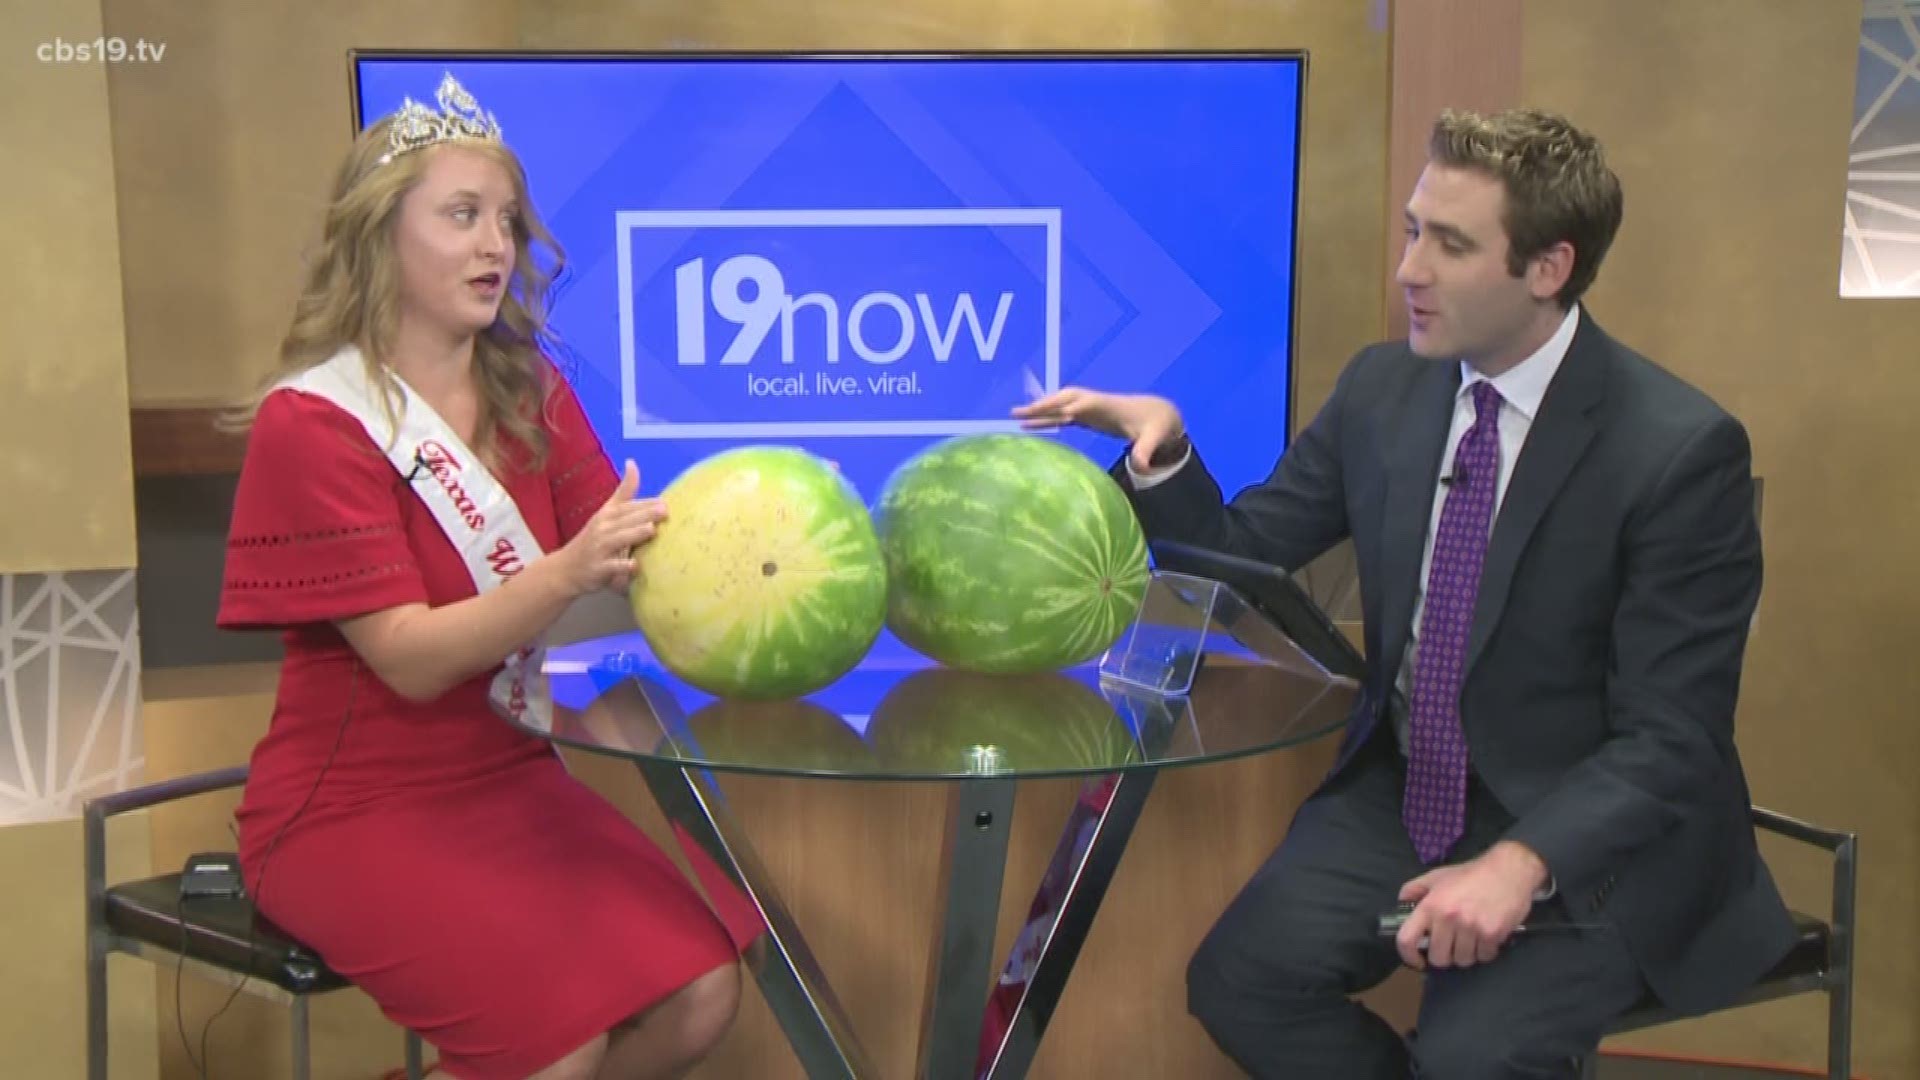 2018 Texas Watermelon Queen Hannah Crisp joins Mike on 19now to discuss the upcoming 29th Annual What-A-Melon Festival.